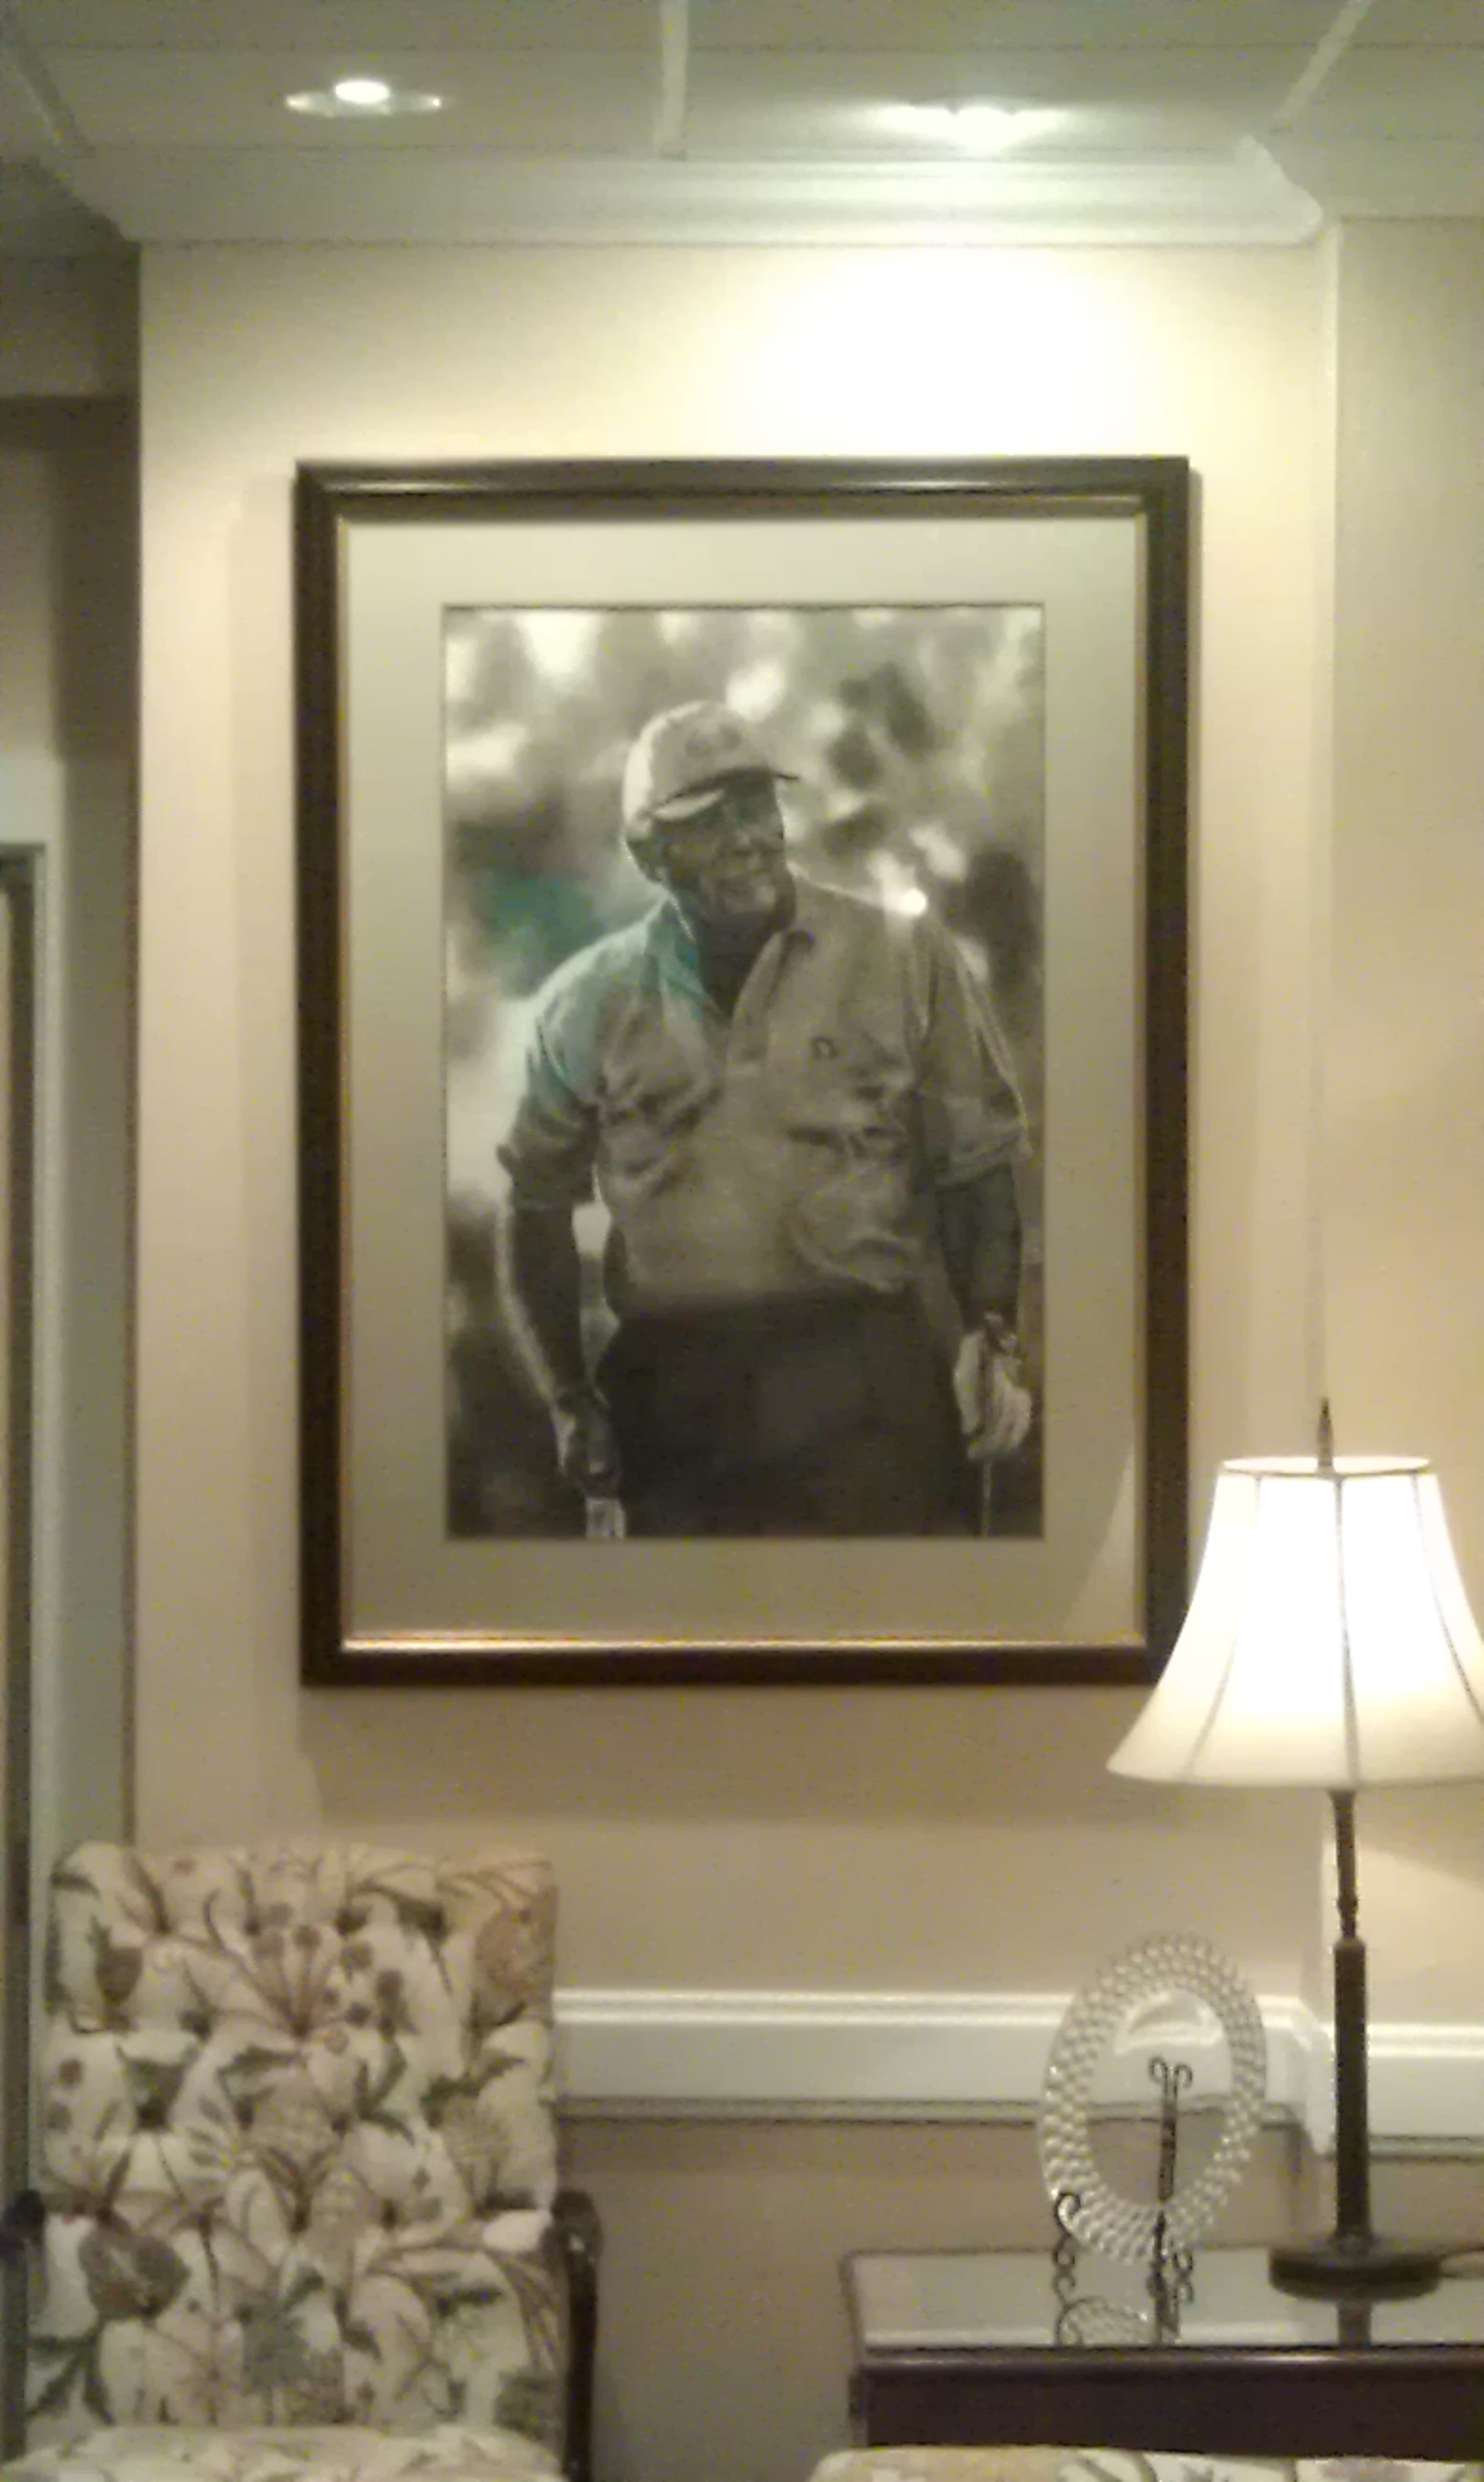 Latrobe Country Club: Charcoal sketch of Arnold Palmer